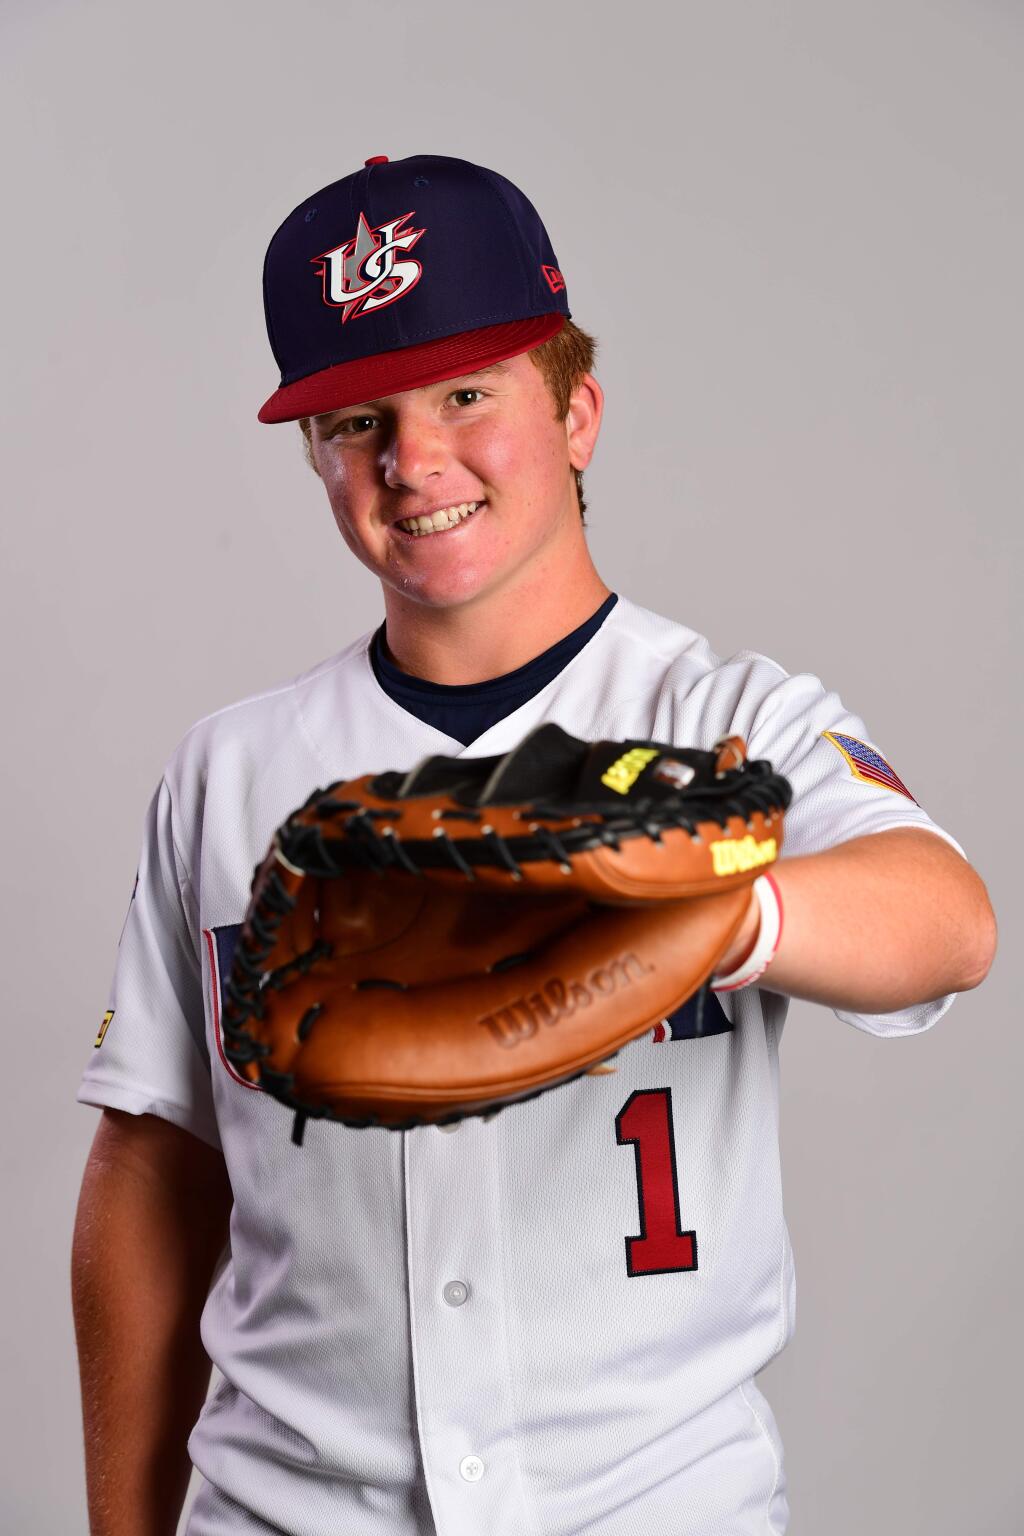 Joe Brown will miss the first week of high school as Team USA's 15U baseball squad plays in the World Cup tournament in Panama. Brown's team begins play Friday against China. (USA Baseball photo).